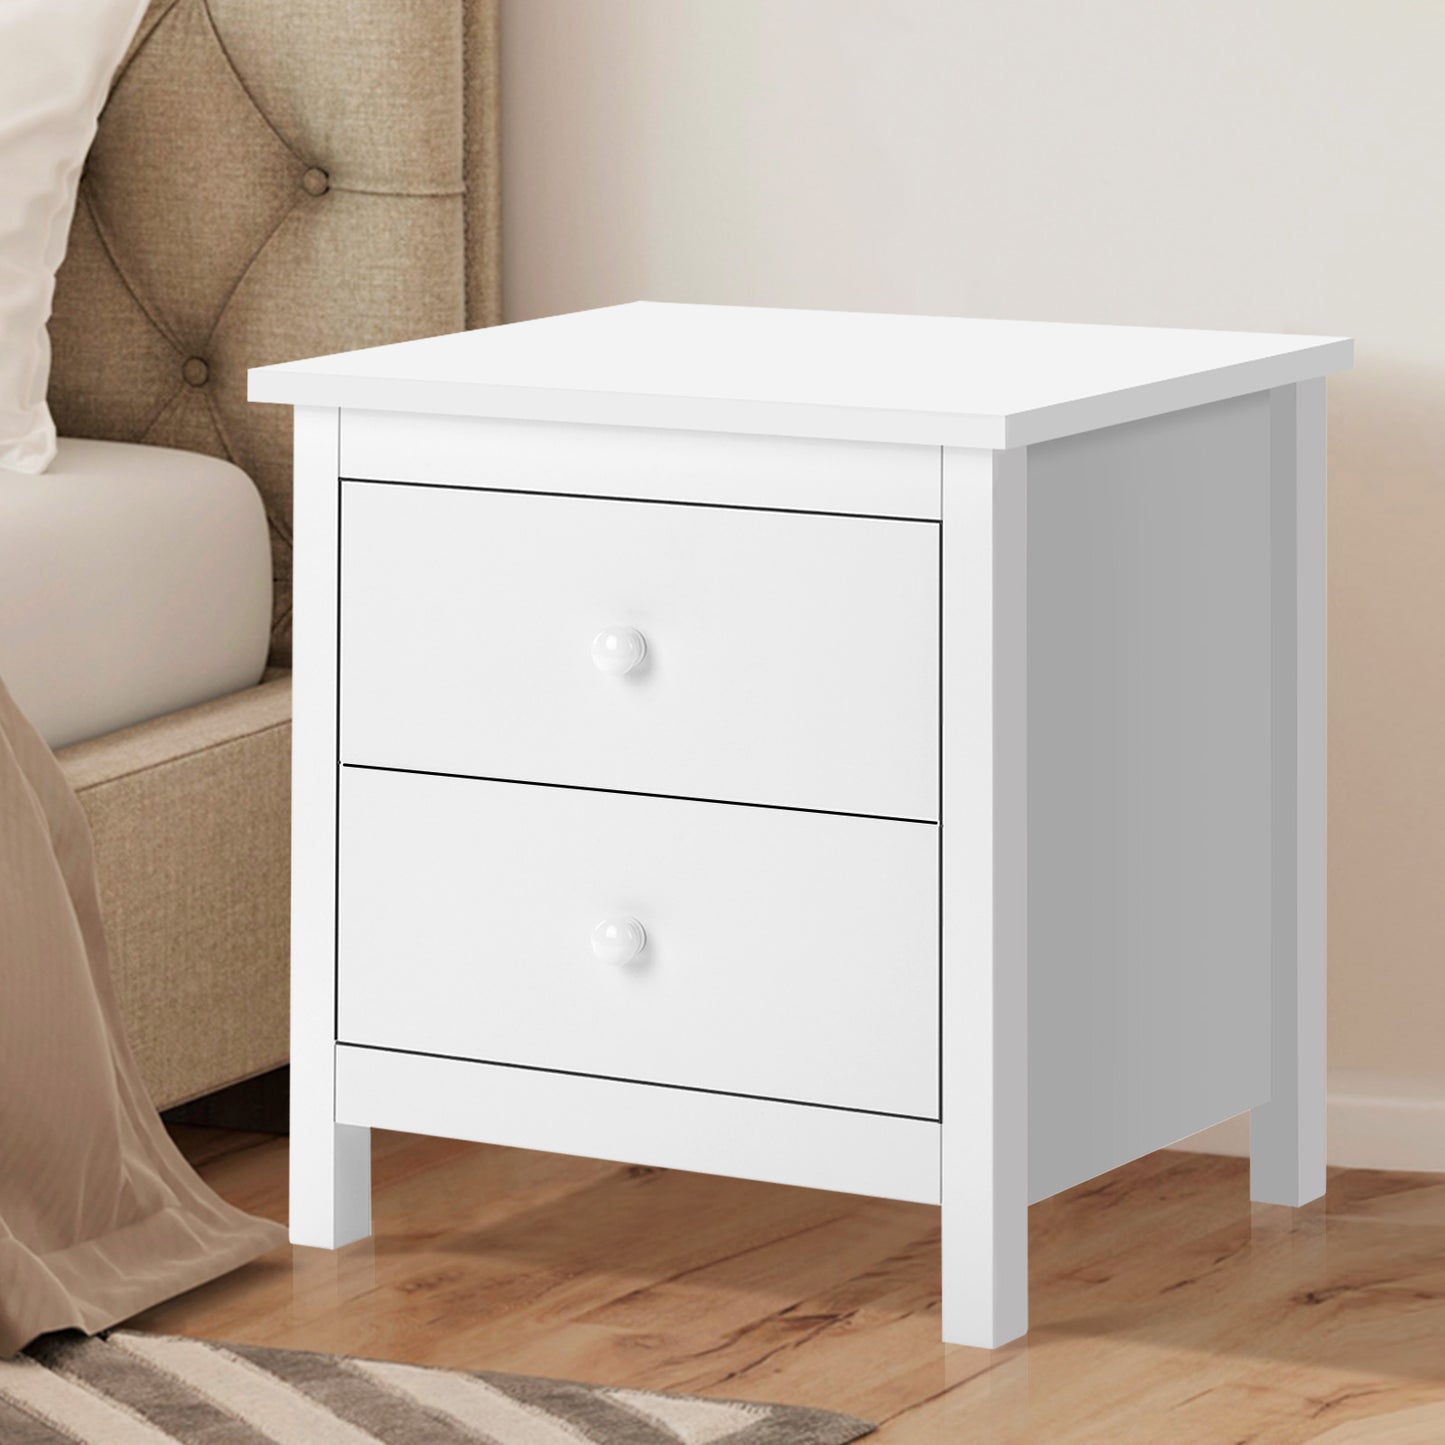 ELFORDSON Bedside Table Hamptons Nightstand Storage Side End 2 Drawers White